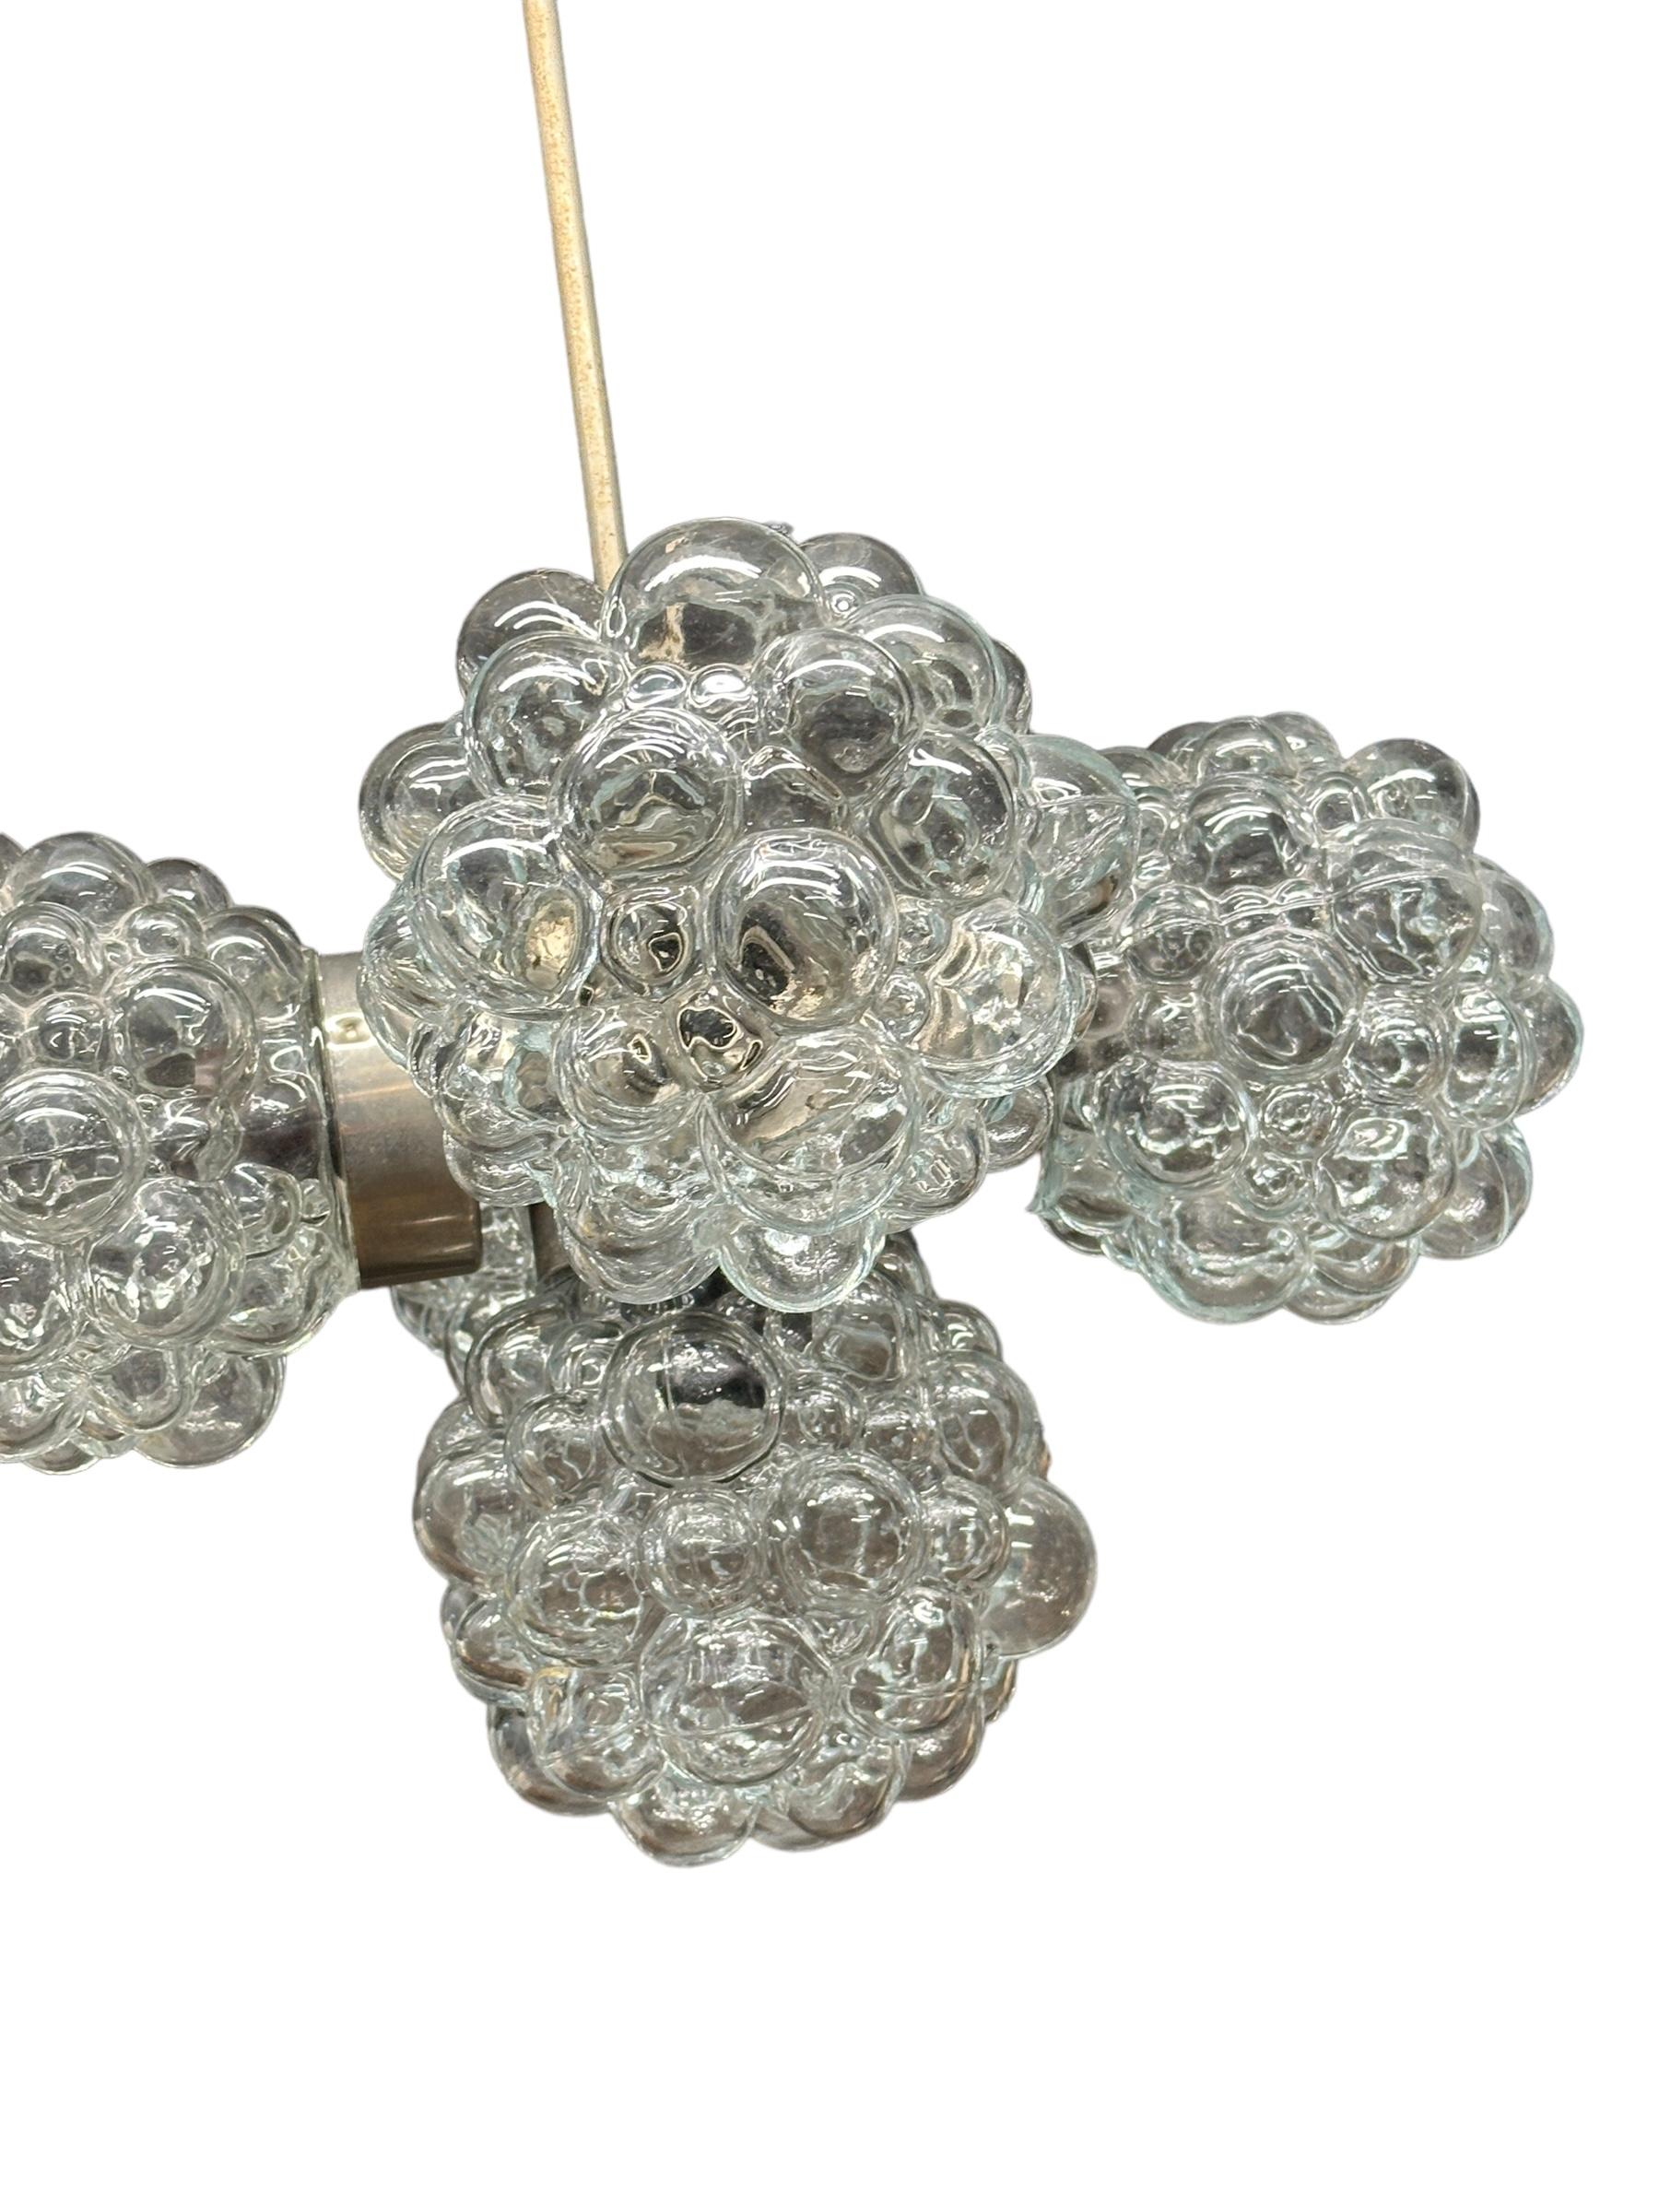 5 Light Bubble Glass Helena Tynell Style Chandelier, Austria 1960s For Sale 2